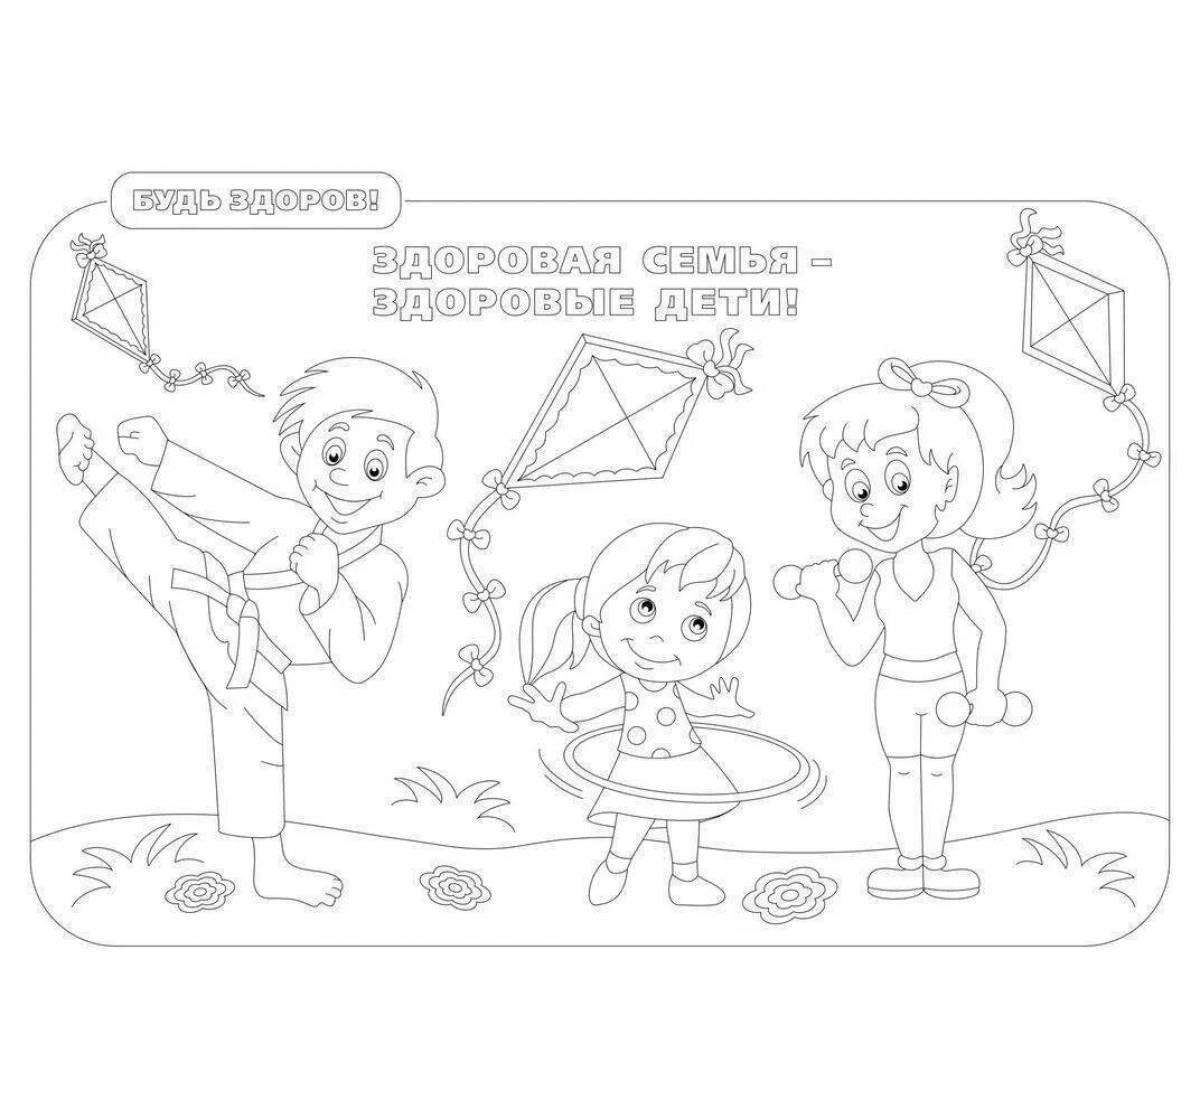 Health inspiring coloring page